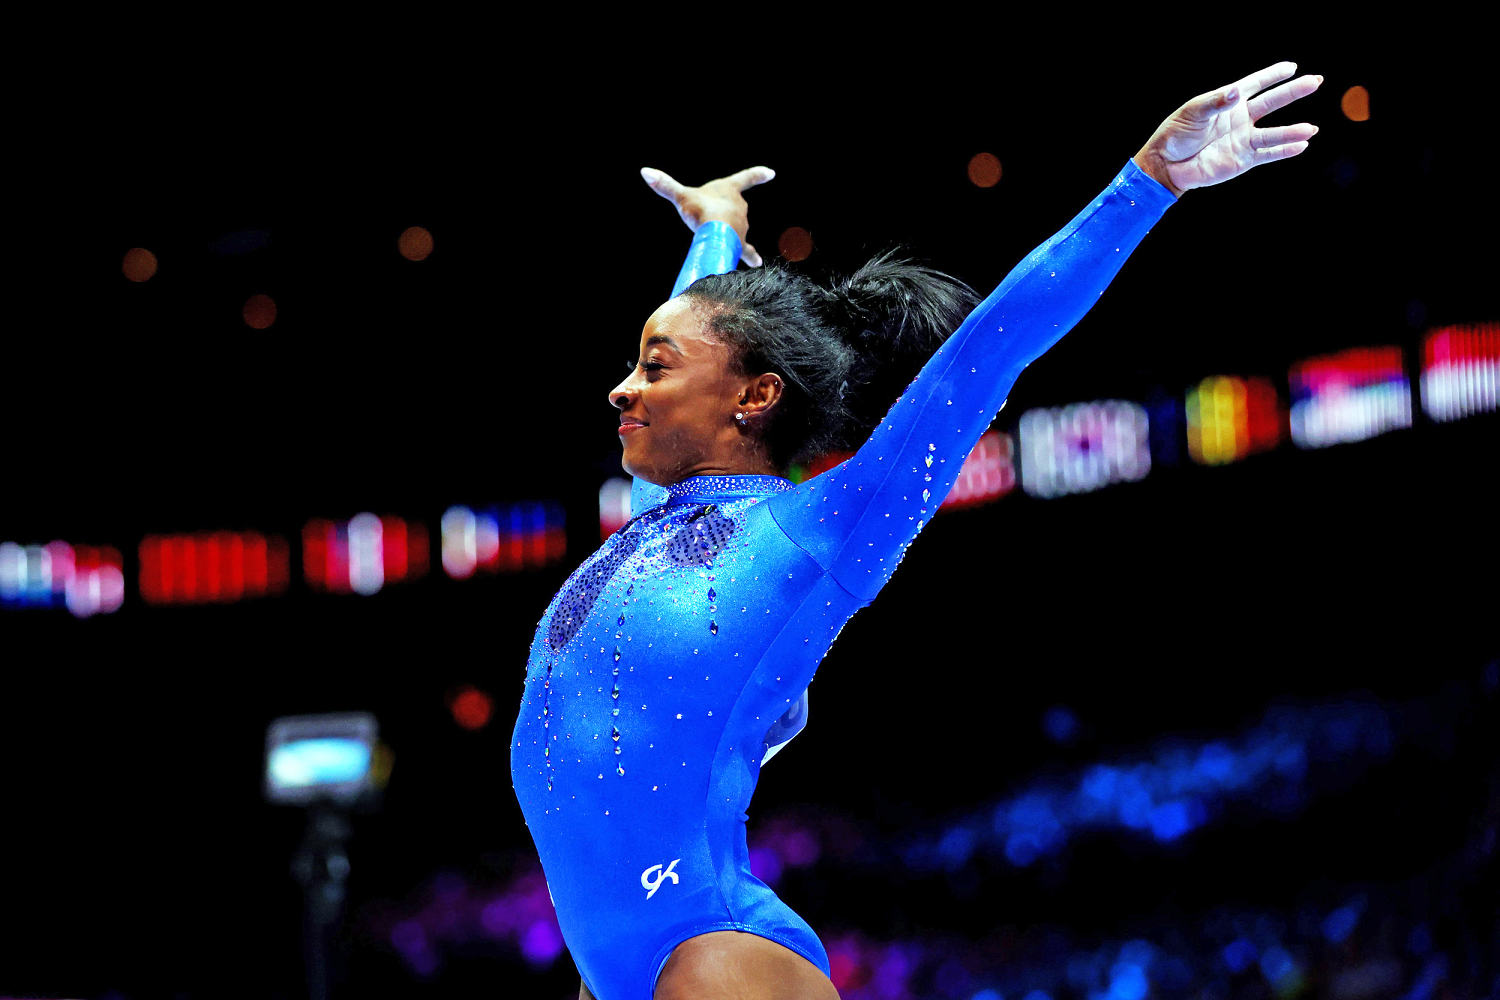 Simone Biles wins her 6th world all-around gold medal, breaking her own record